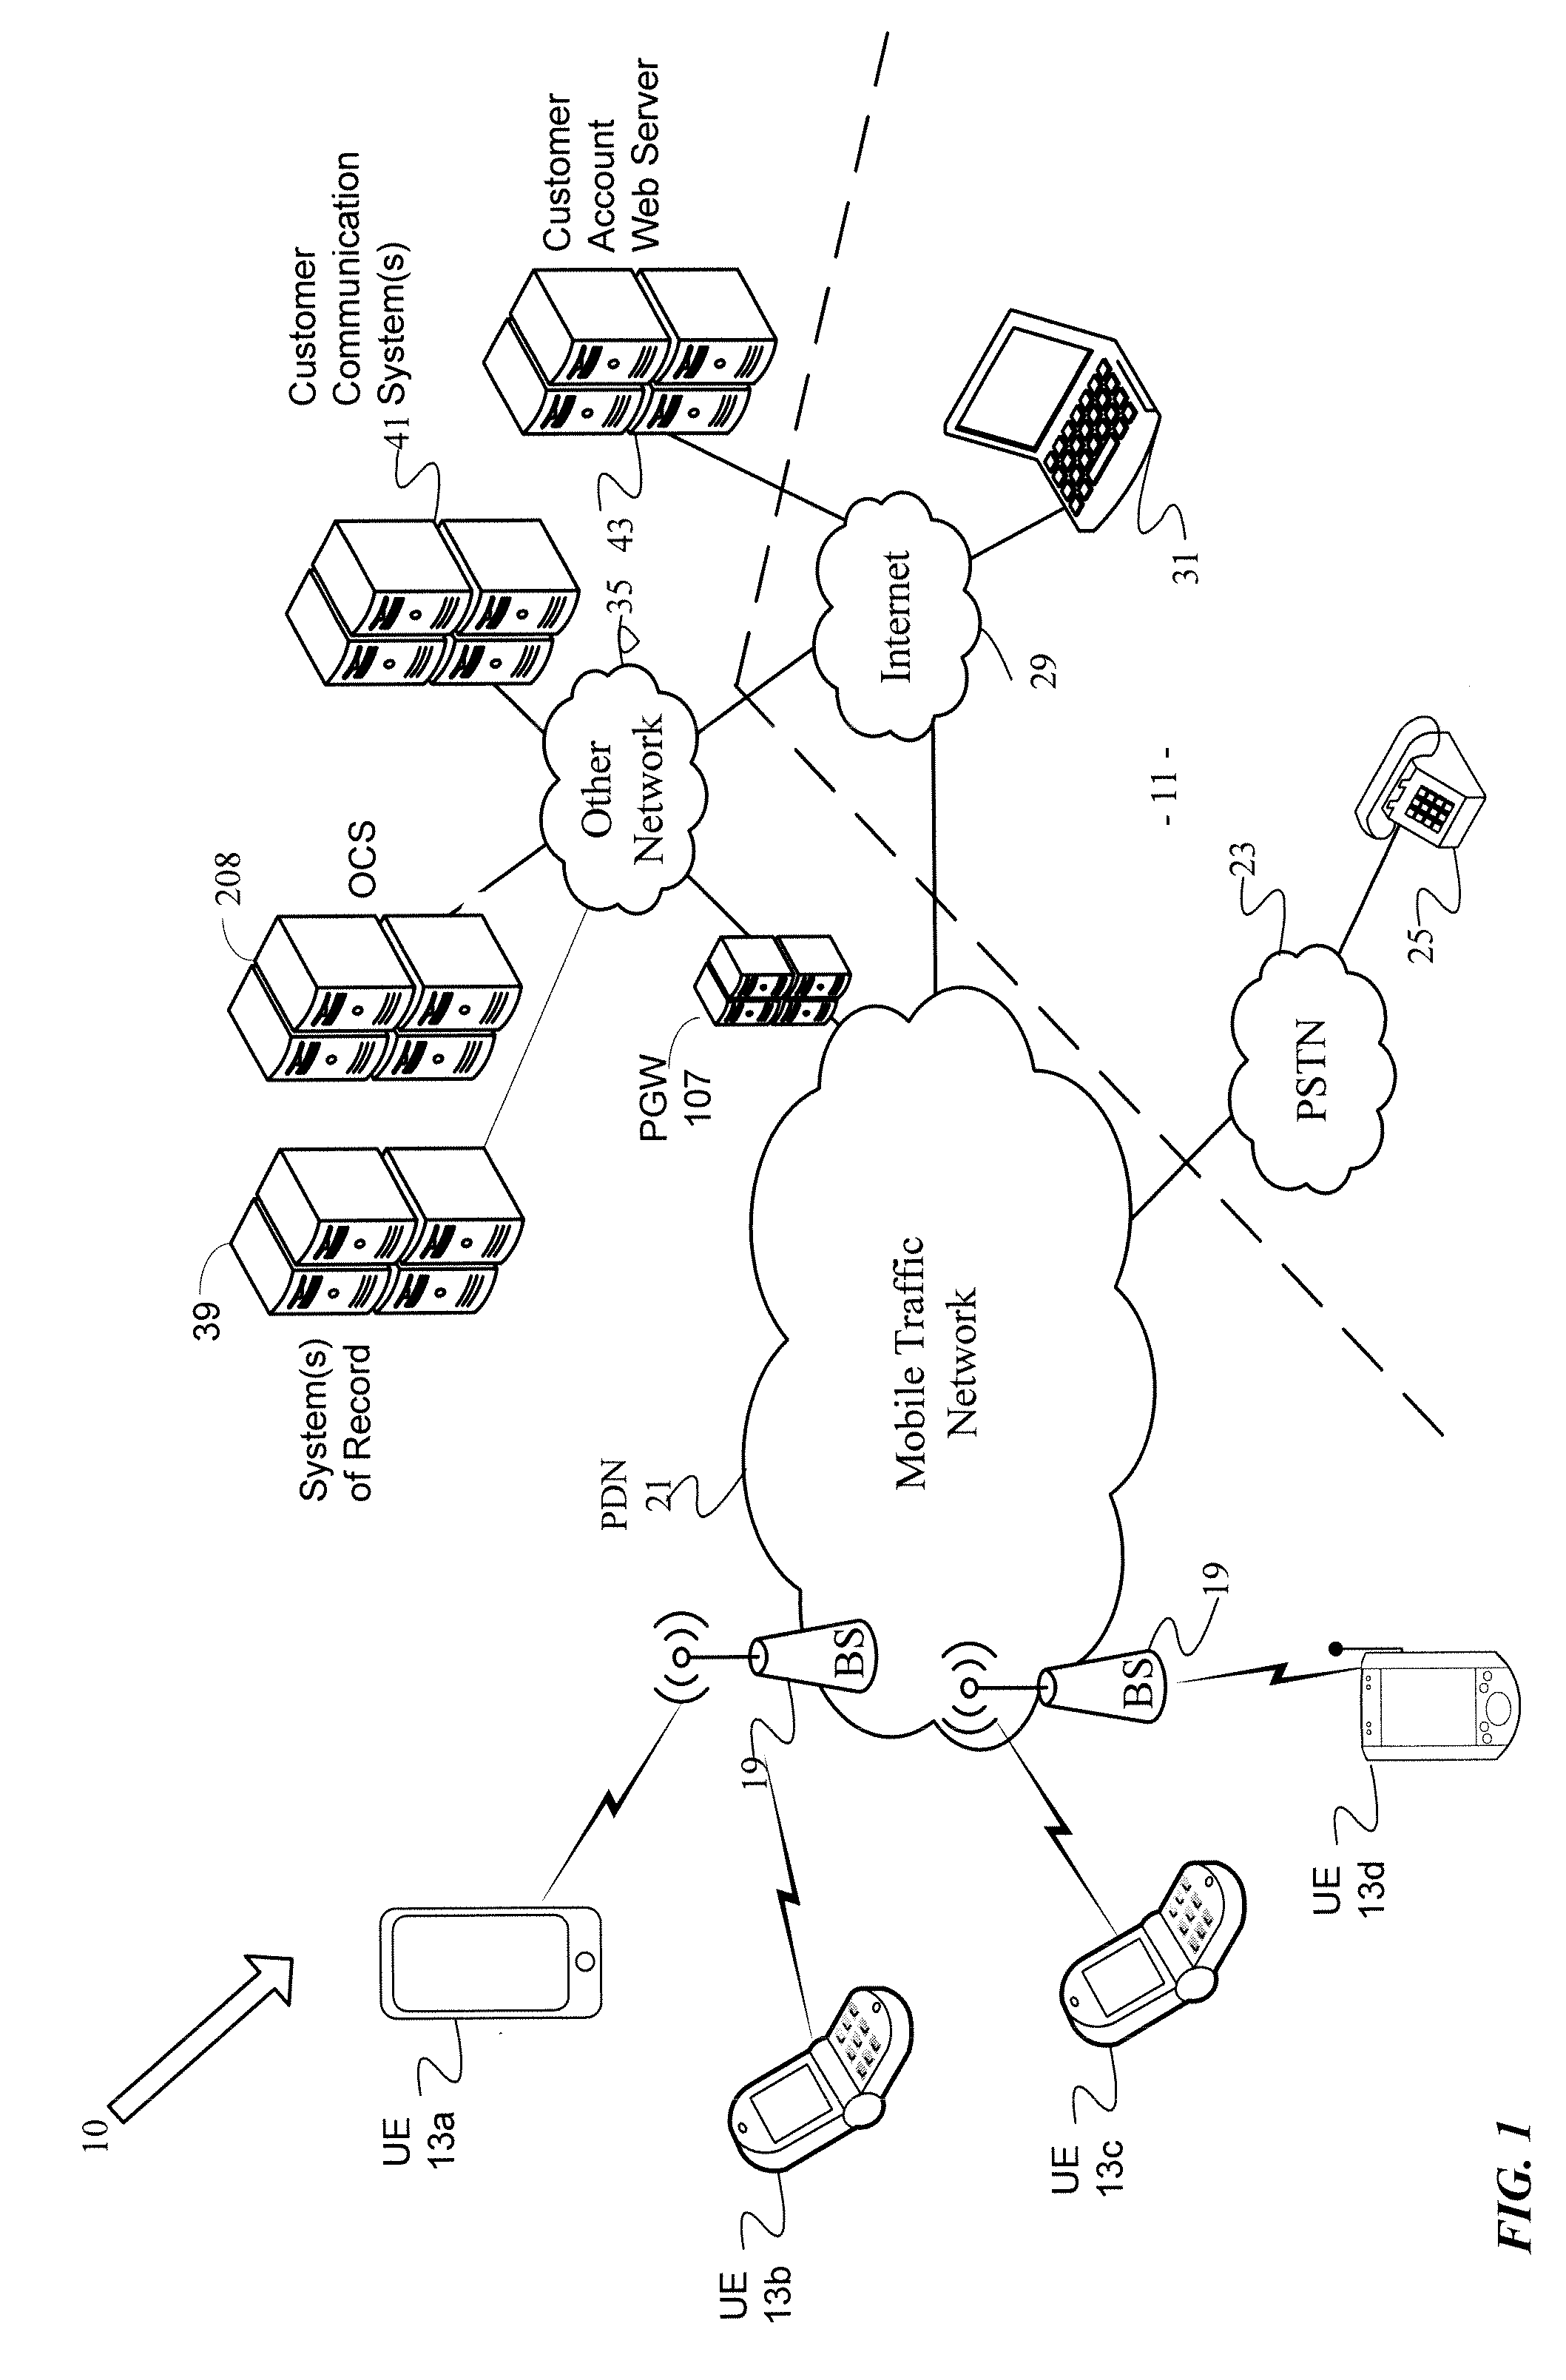 Method and system to provide network status information to a device